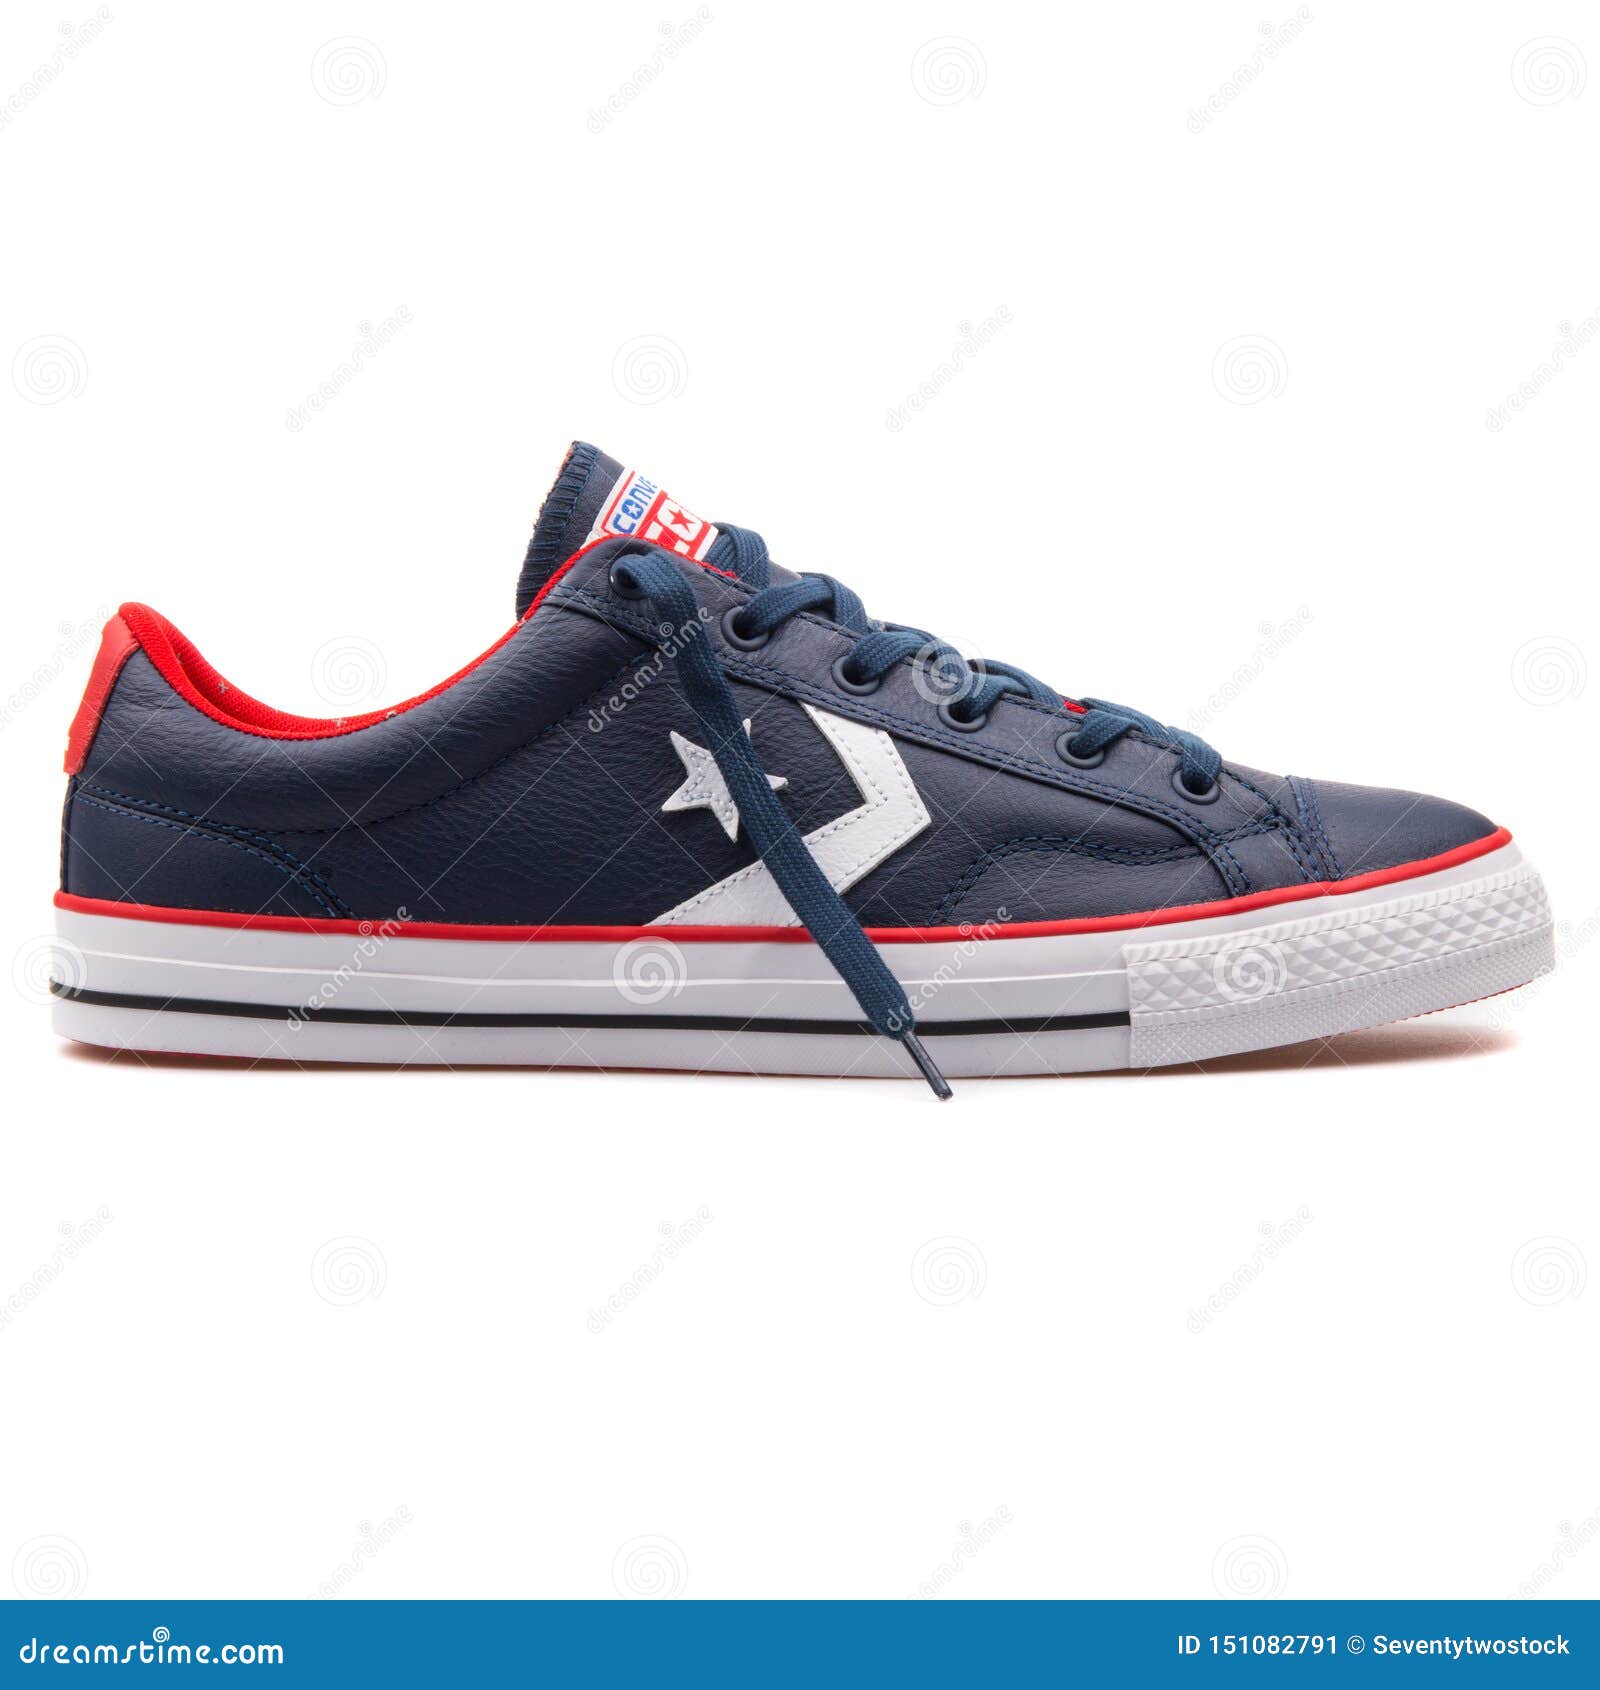 Converse Star Player OX Navy Blue, White and Red Sneaker Editorial Photo -  Image of life, lifestyle: 151082791